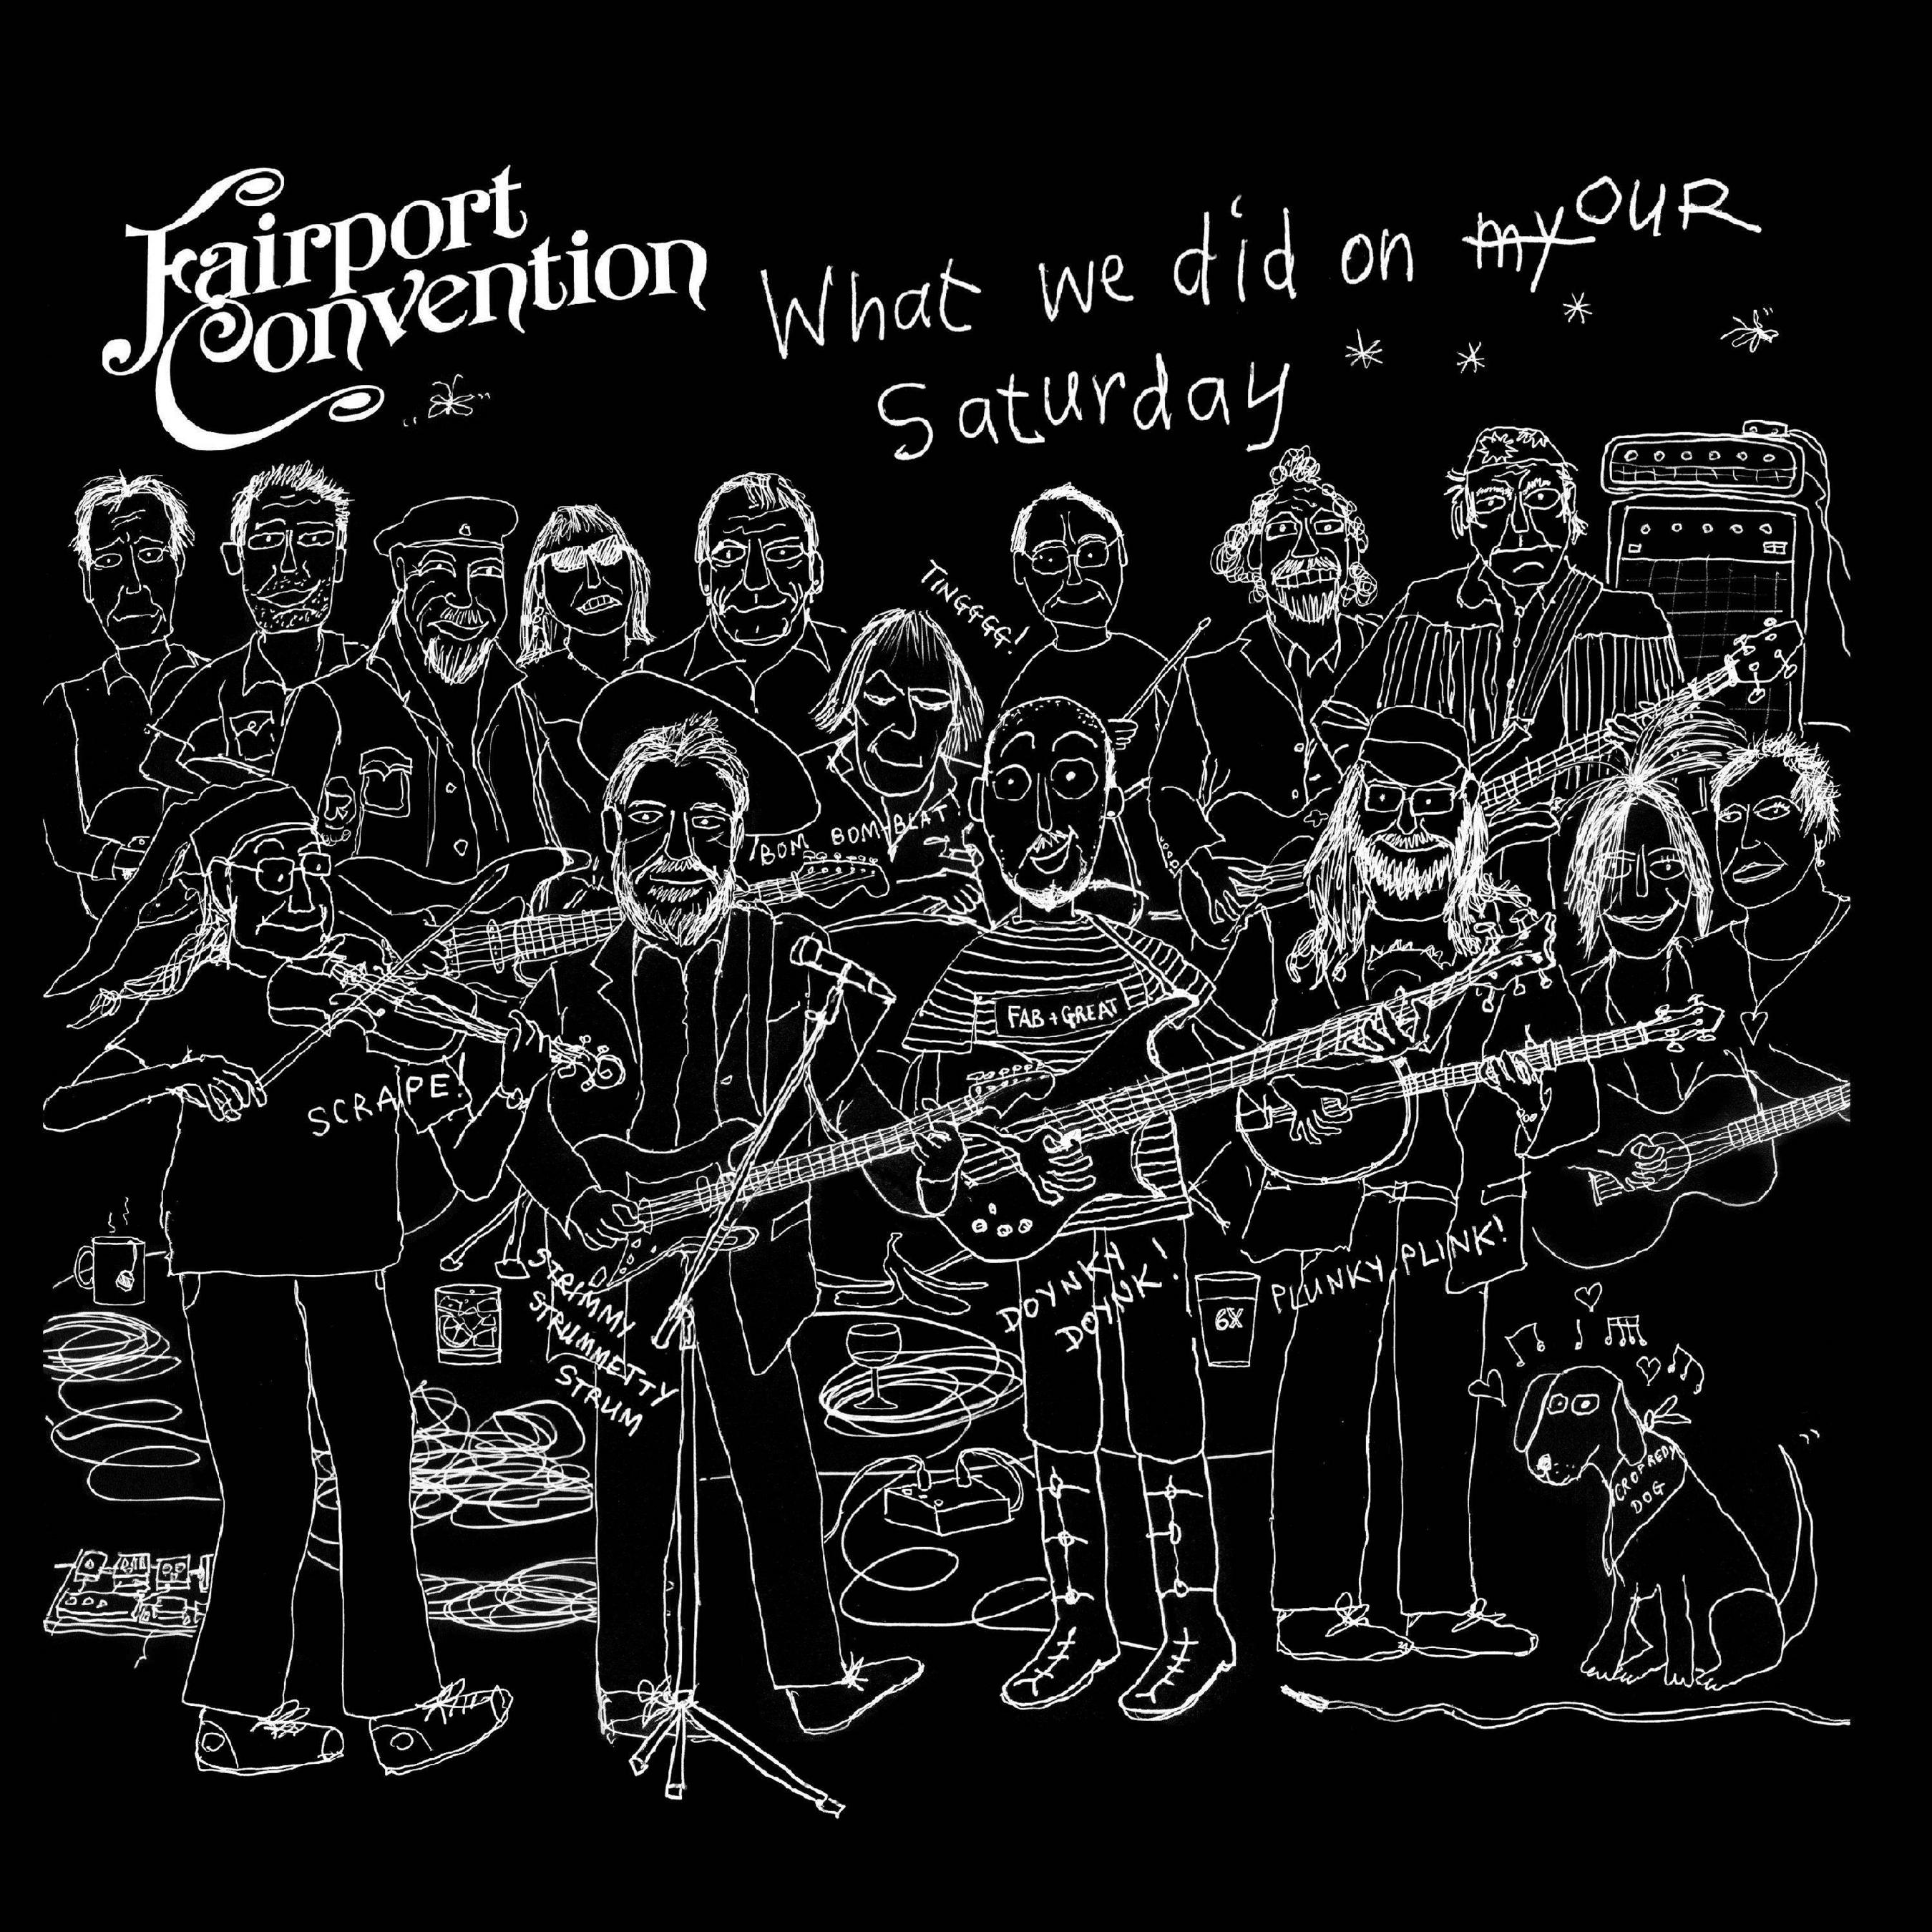 Fairport Convention – What We Did On Our Saturday (2018) [FLAC 24bit/48kHz]